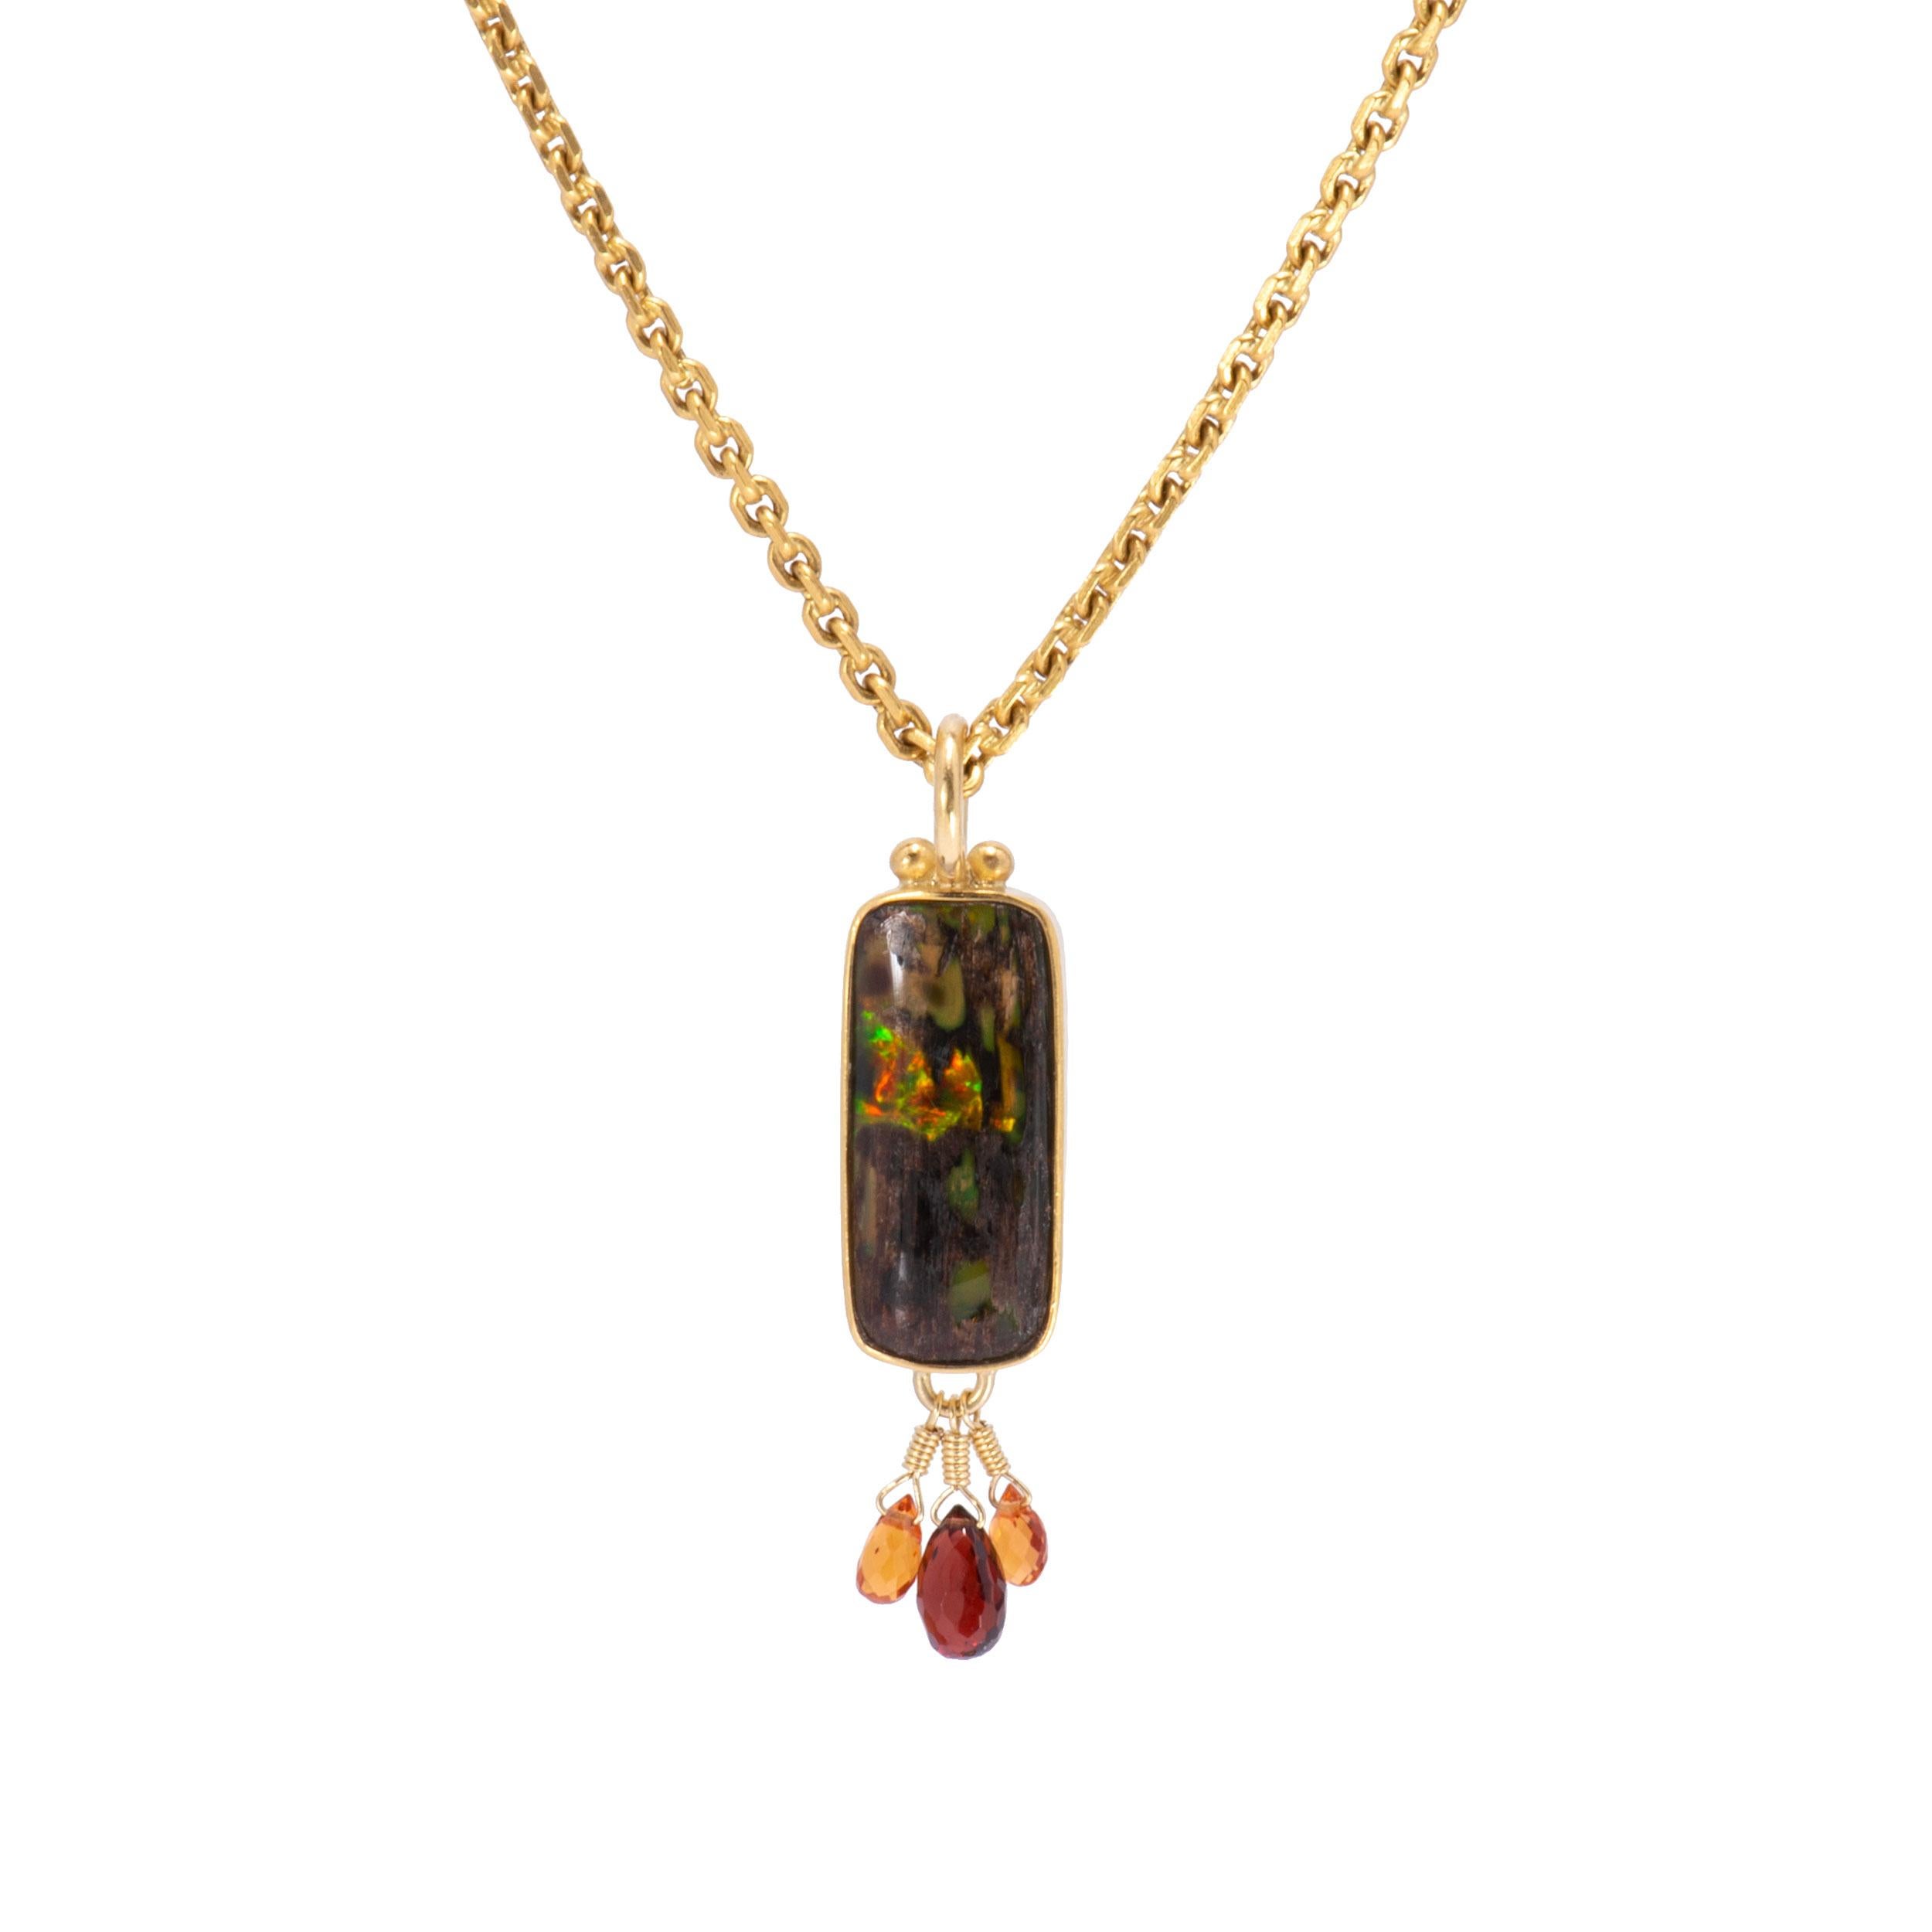 A lozenge pendant of Nevada Wood Opal gleams with green, orange, red and milky gold lights from the depths and is tipped with red garnet and orange sapphire briolettes. Bezel set and beaded in 22k gold and finished with an 18k gold bail and